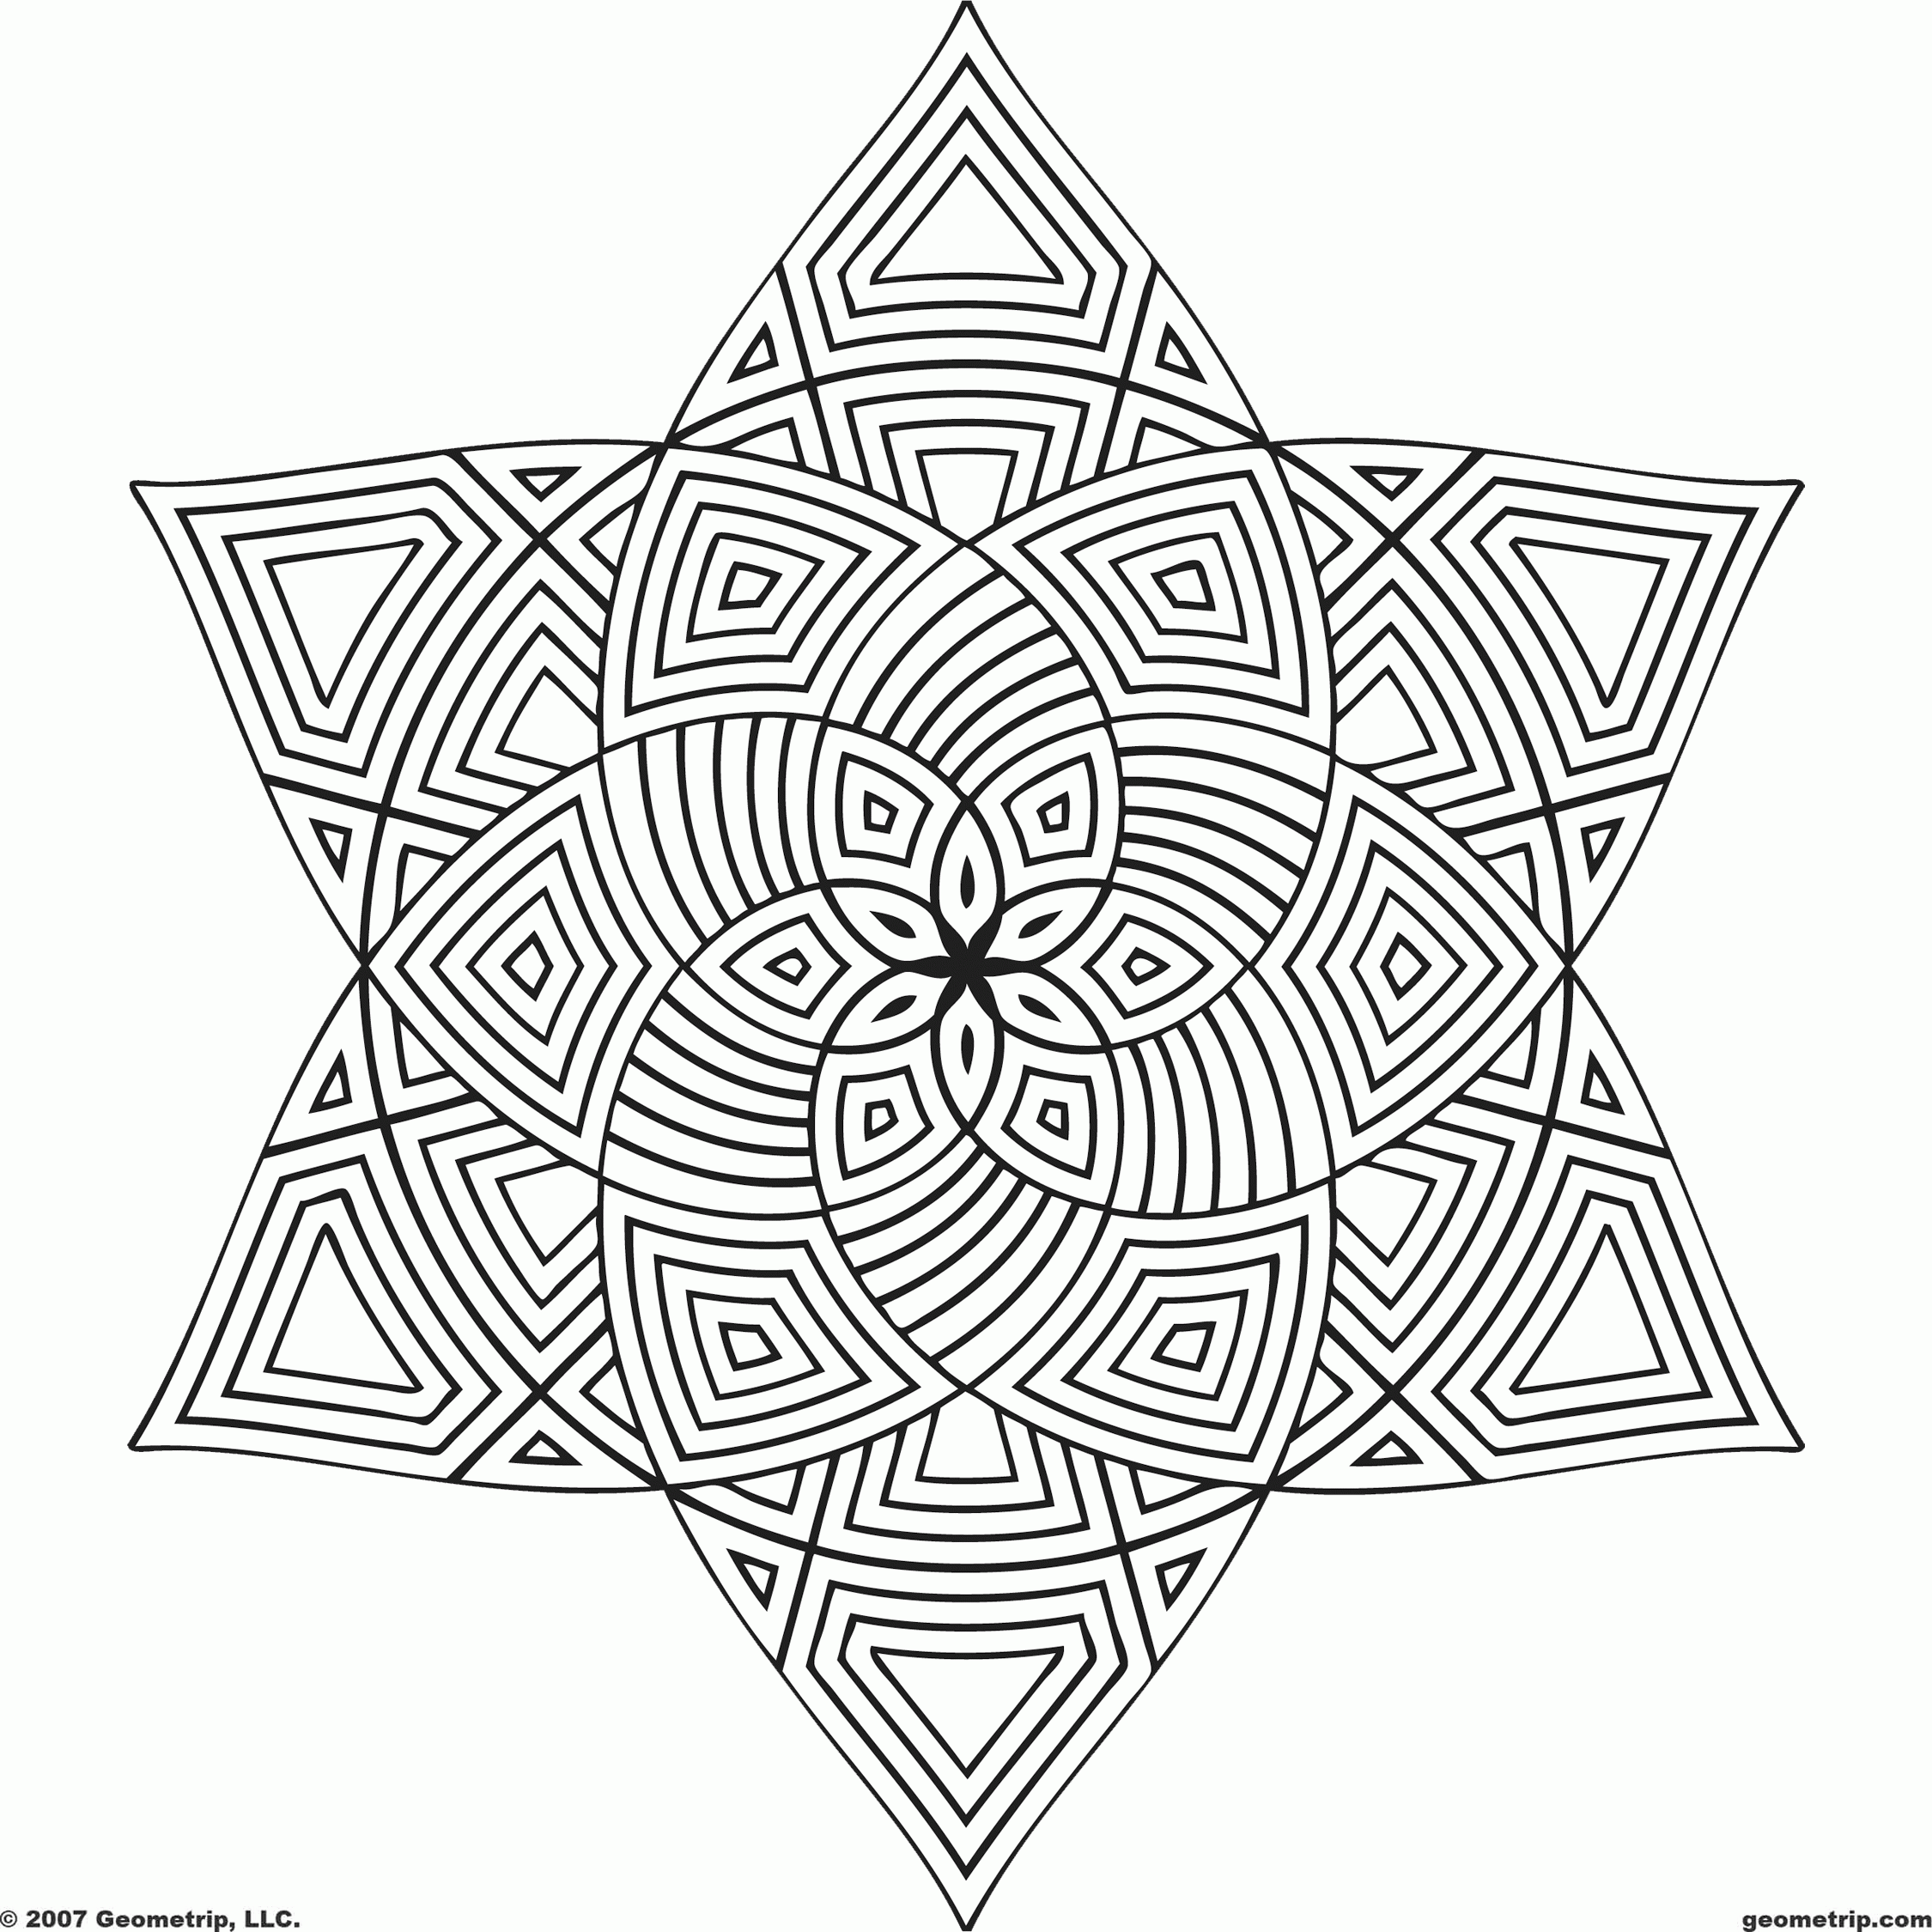 Coloring Pages Hard Designs - Coloring Home